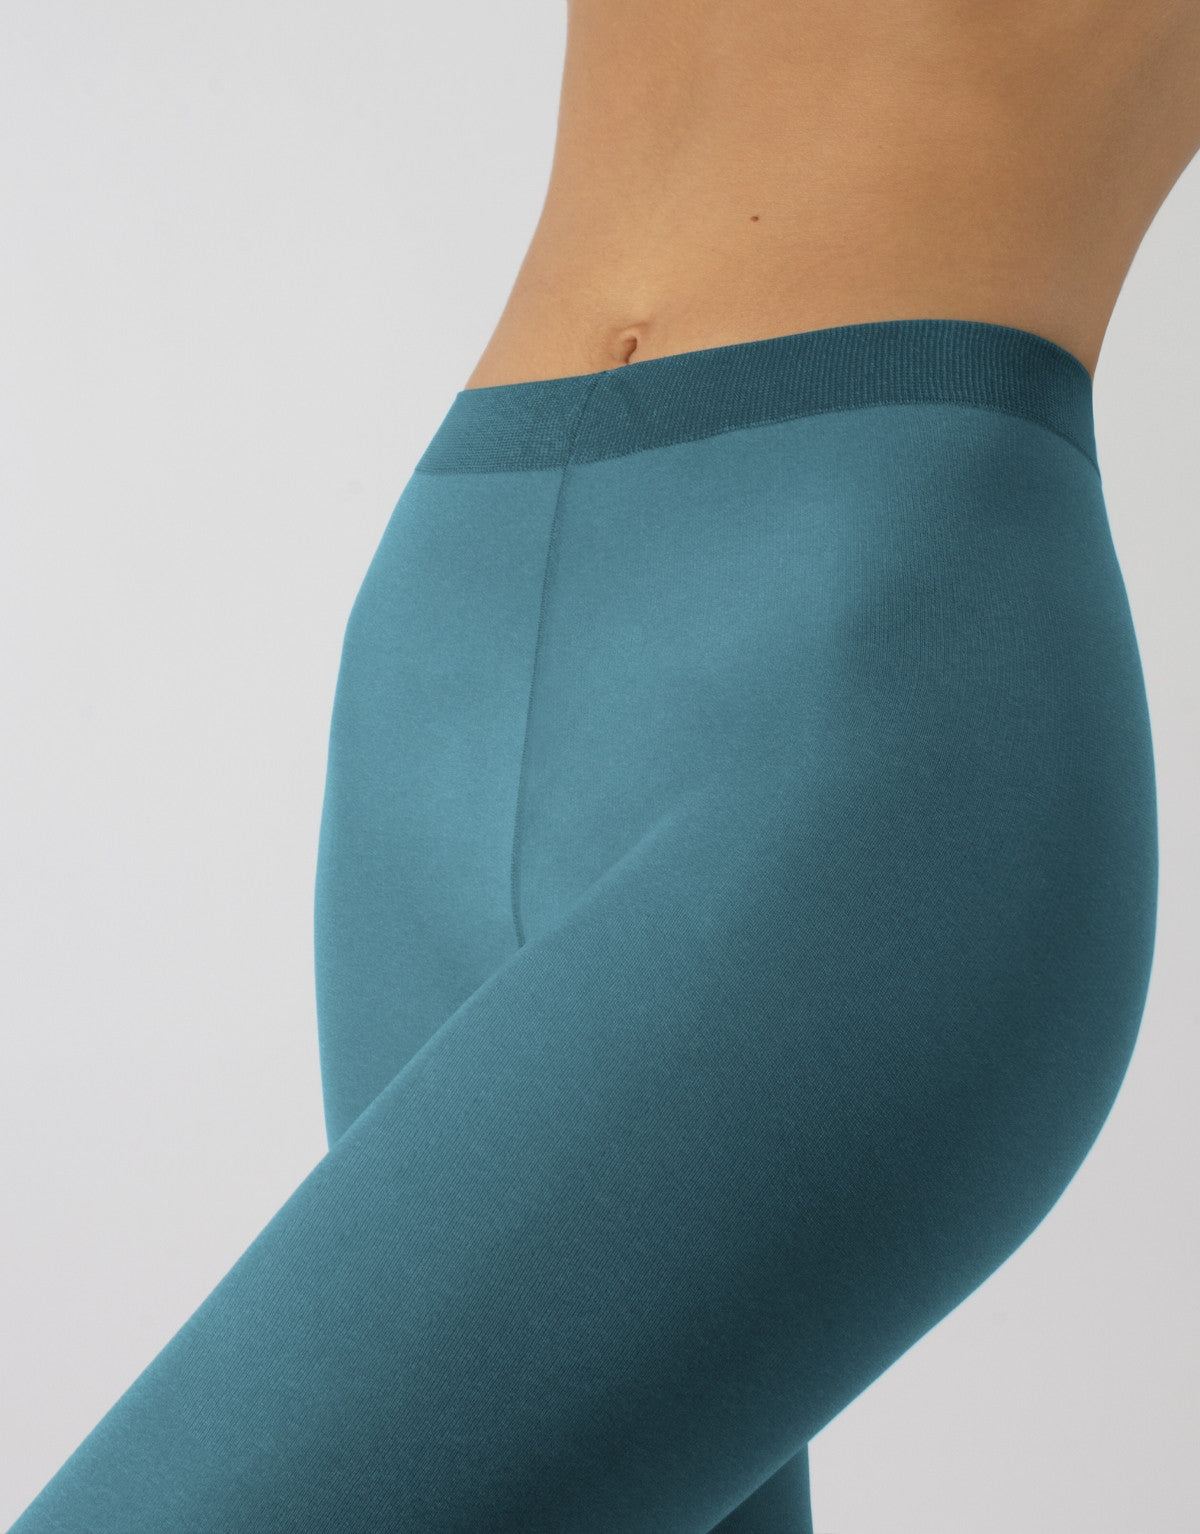 Calzitaly Melange Seam Tights - Teal blue opaque fashion tights with a knitted fleck effect, white back seam.